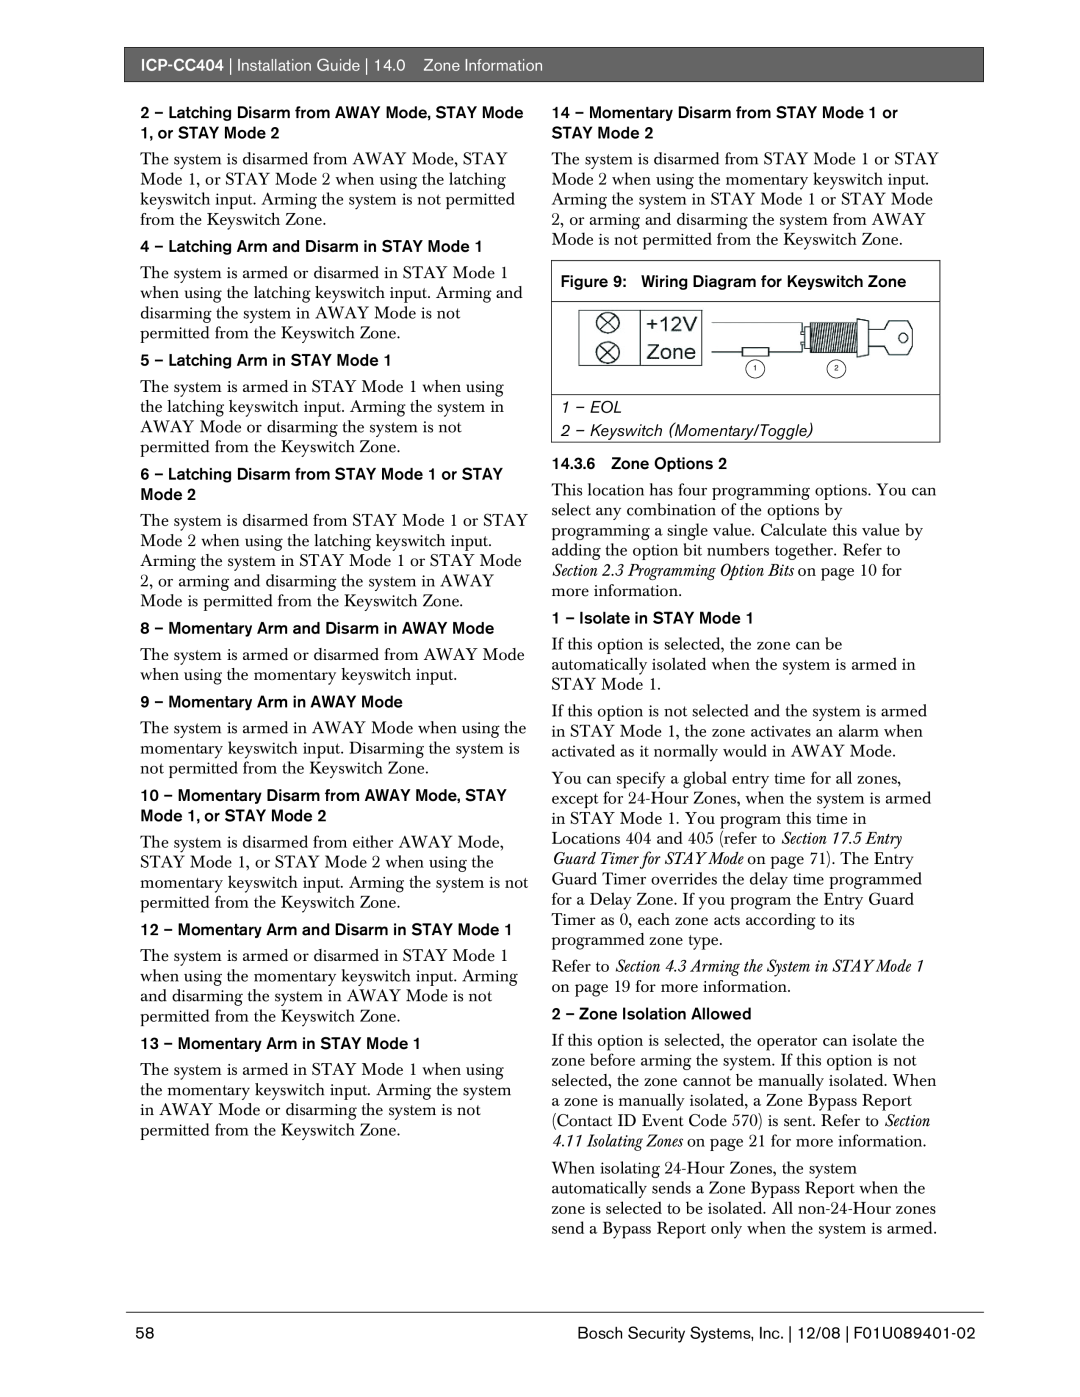 Bosch Appliances ICP-CC404 manual 4 – Latching Arm and Disarm in STAY Mode 